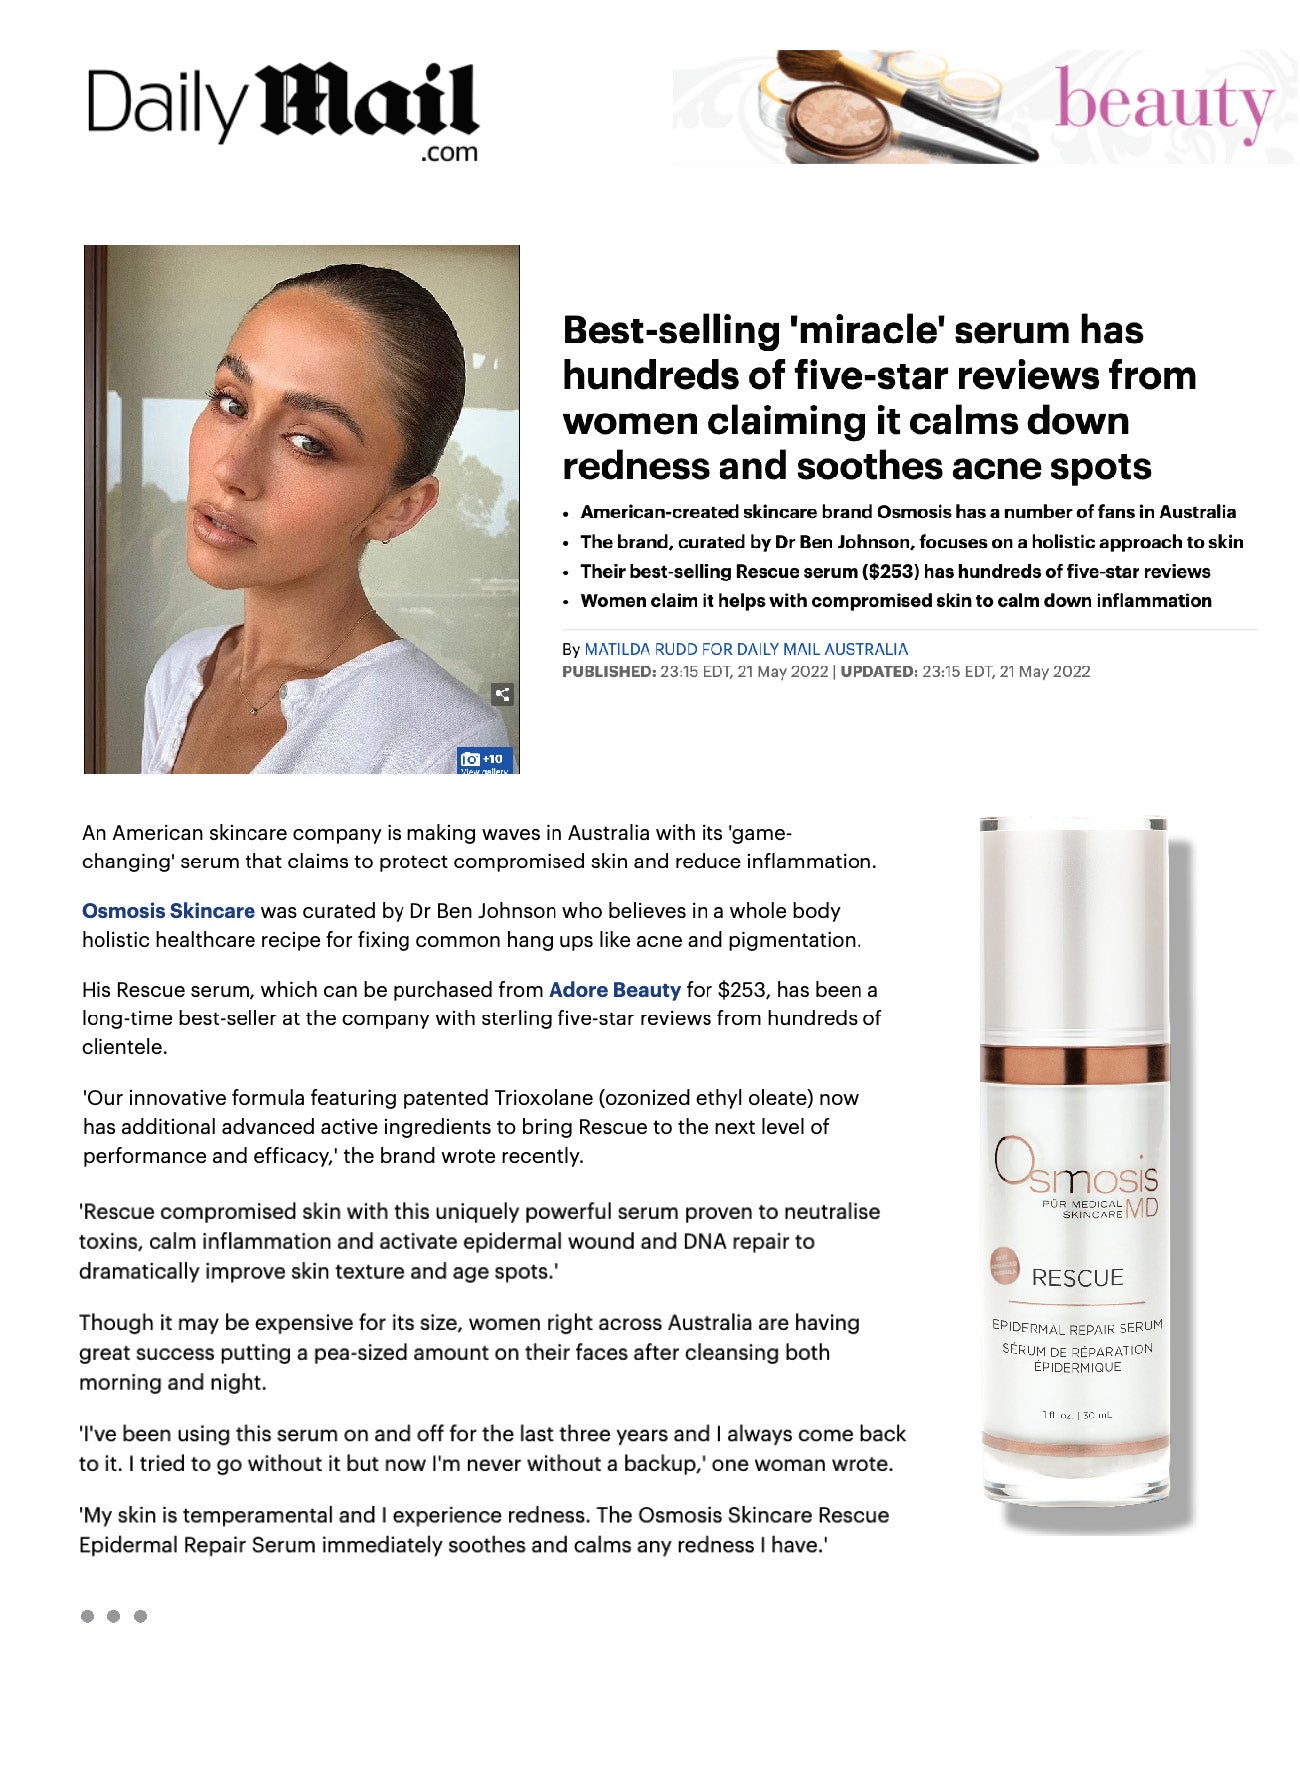 Daily Mail Features Osmosis Beauty